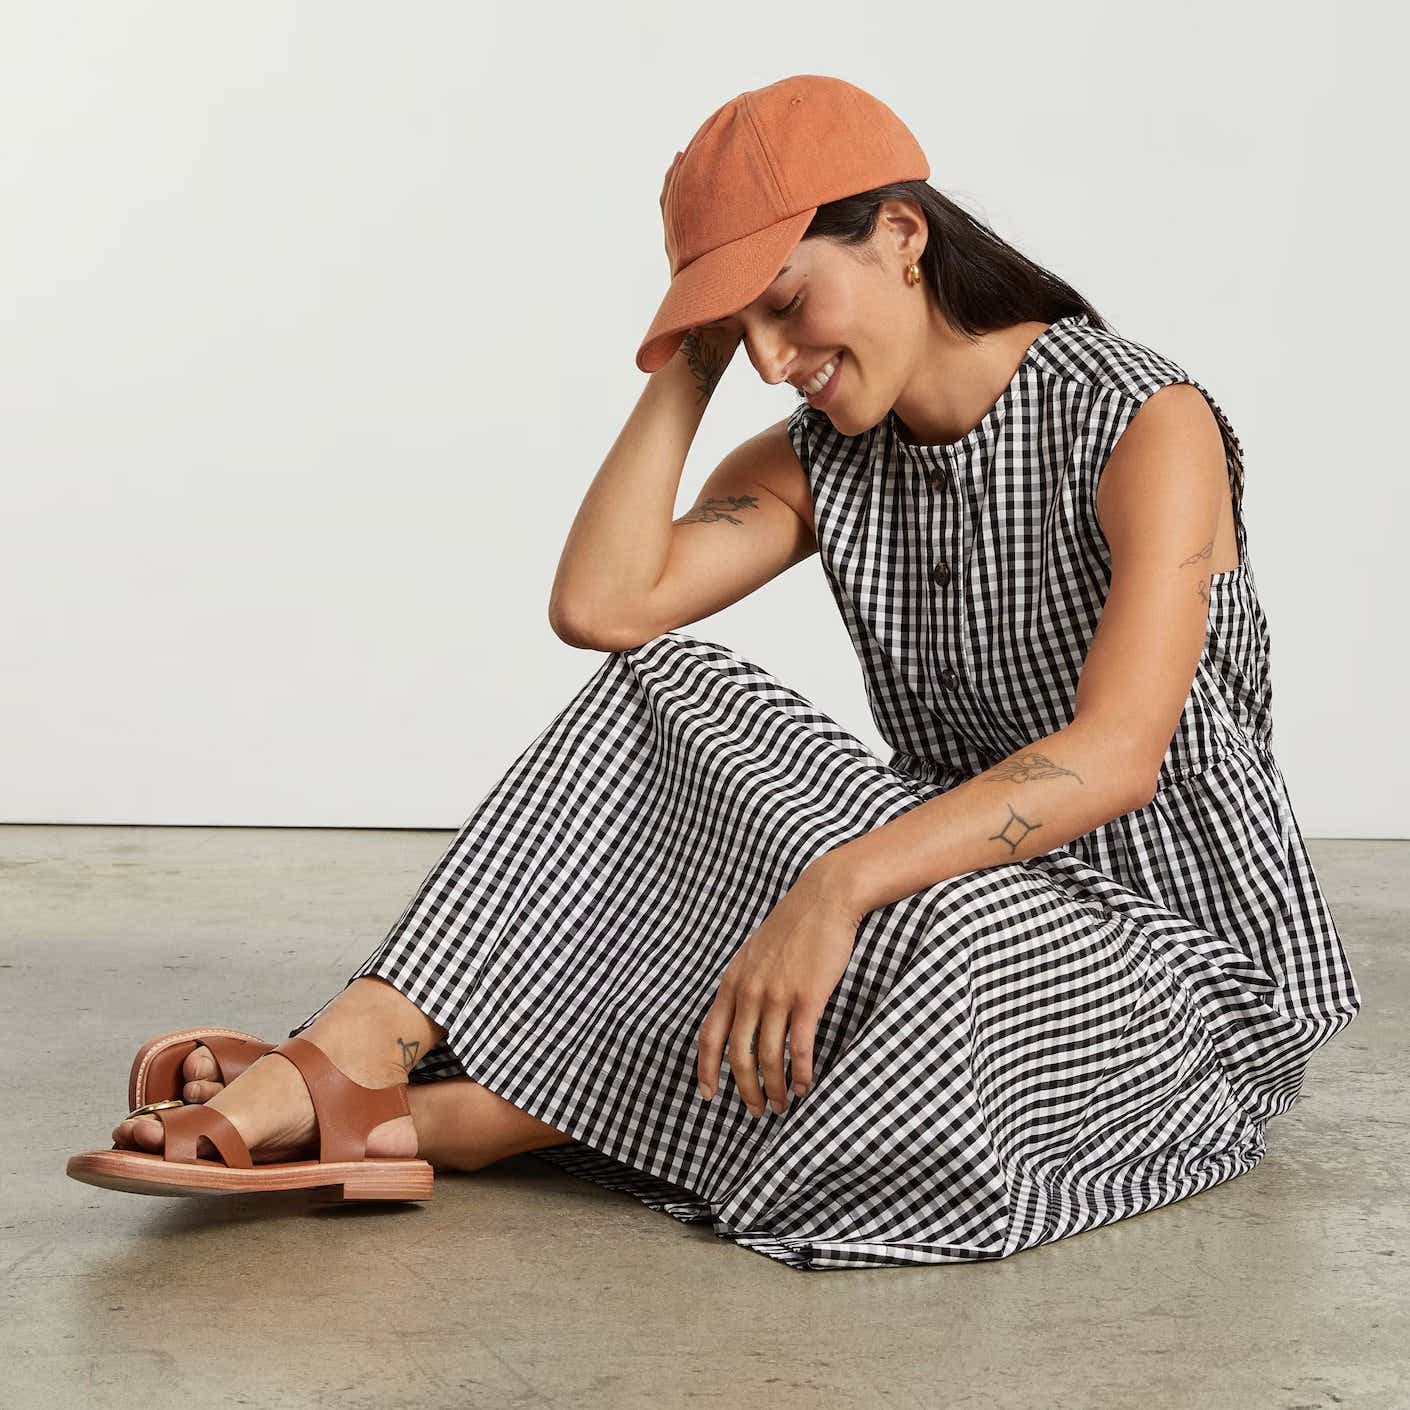 A seated, smiling woman wears a black and white gingham midi dress and an orange baseball cap.